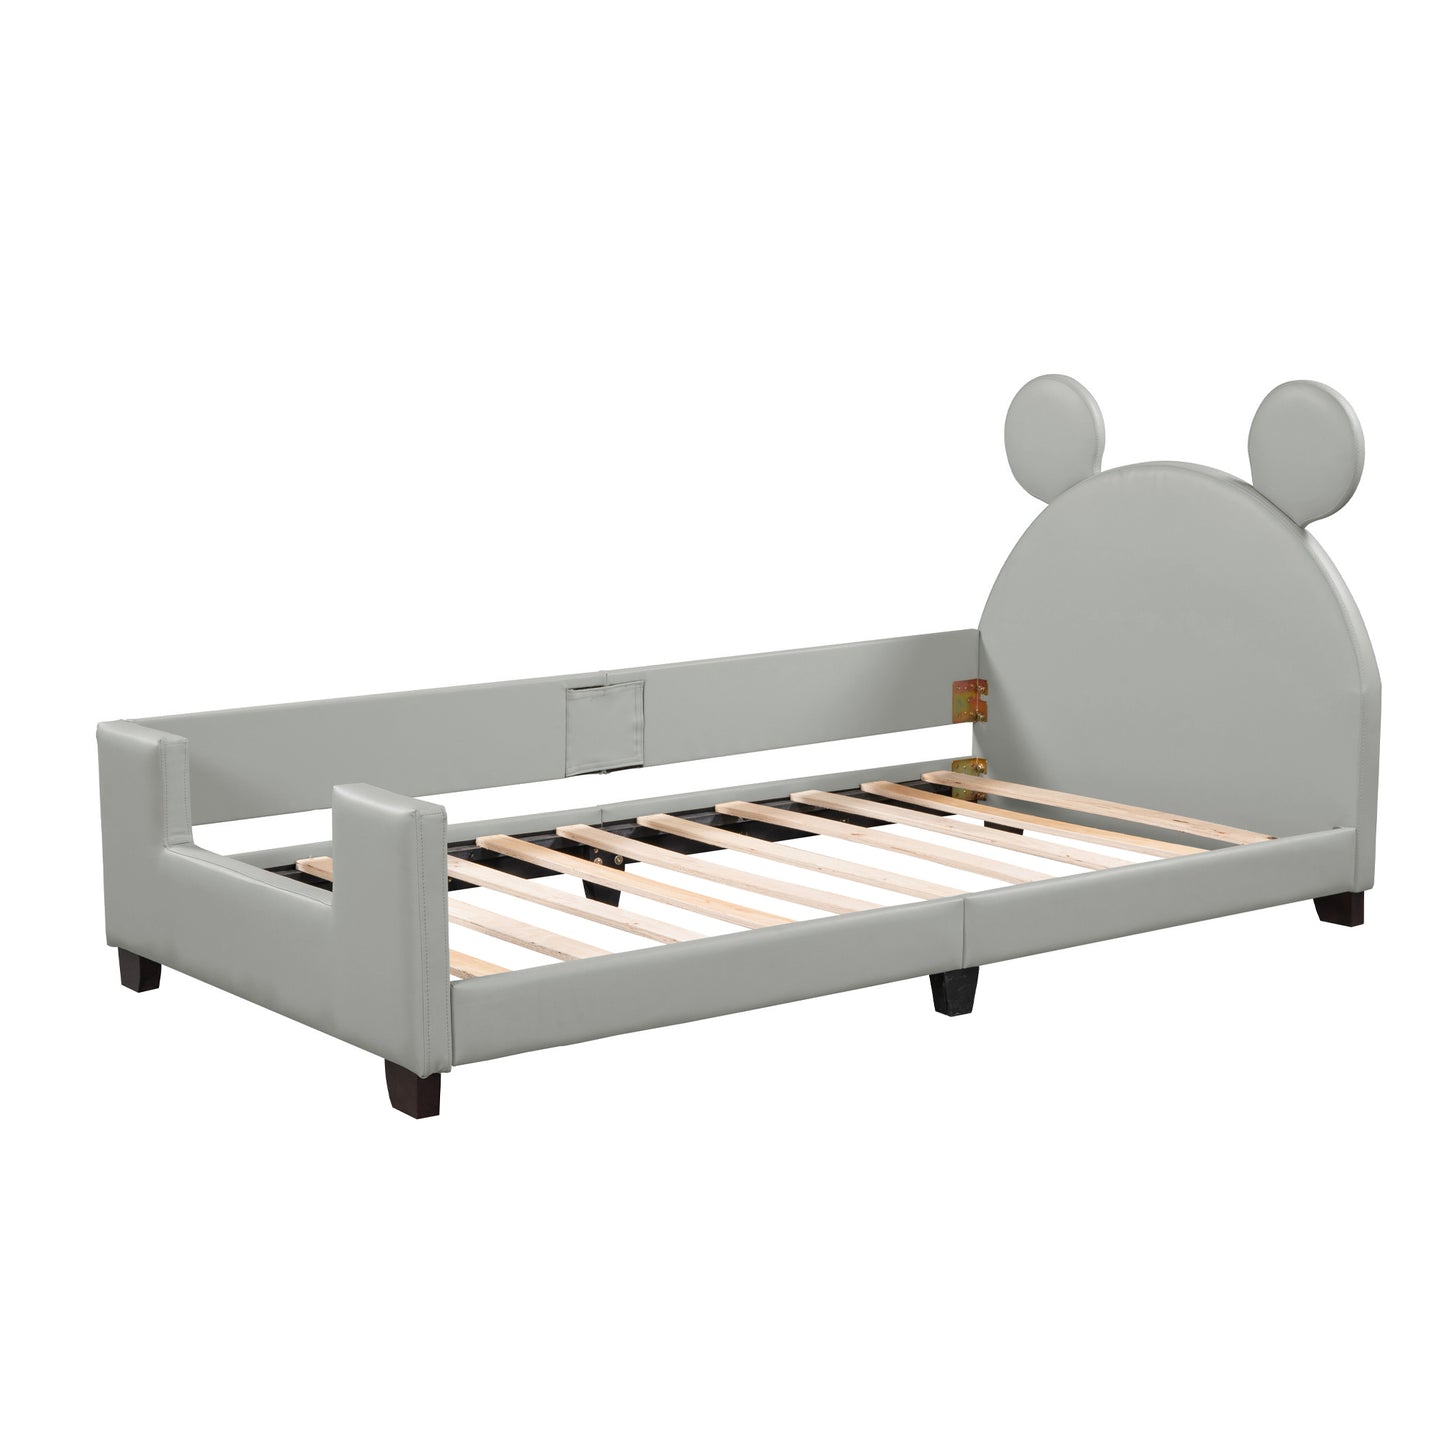 Twin Size Upholstered Daybed with Carton Ears Shaped Headboard, Grey